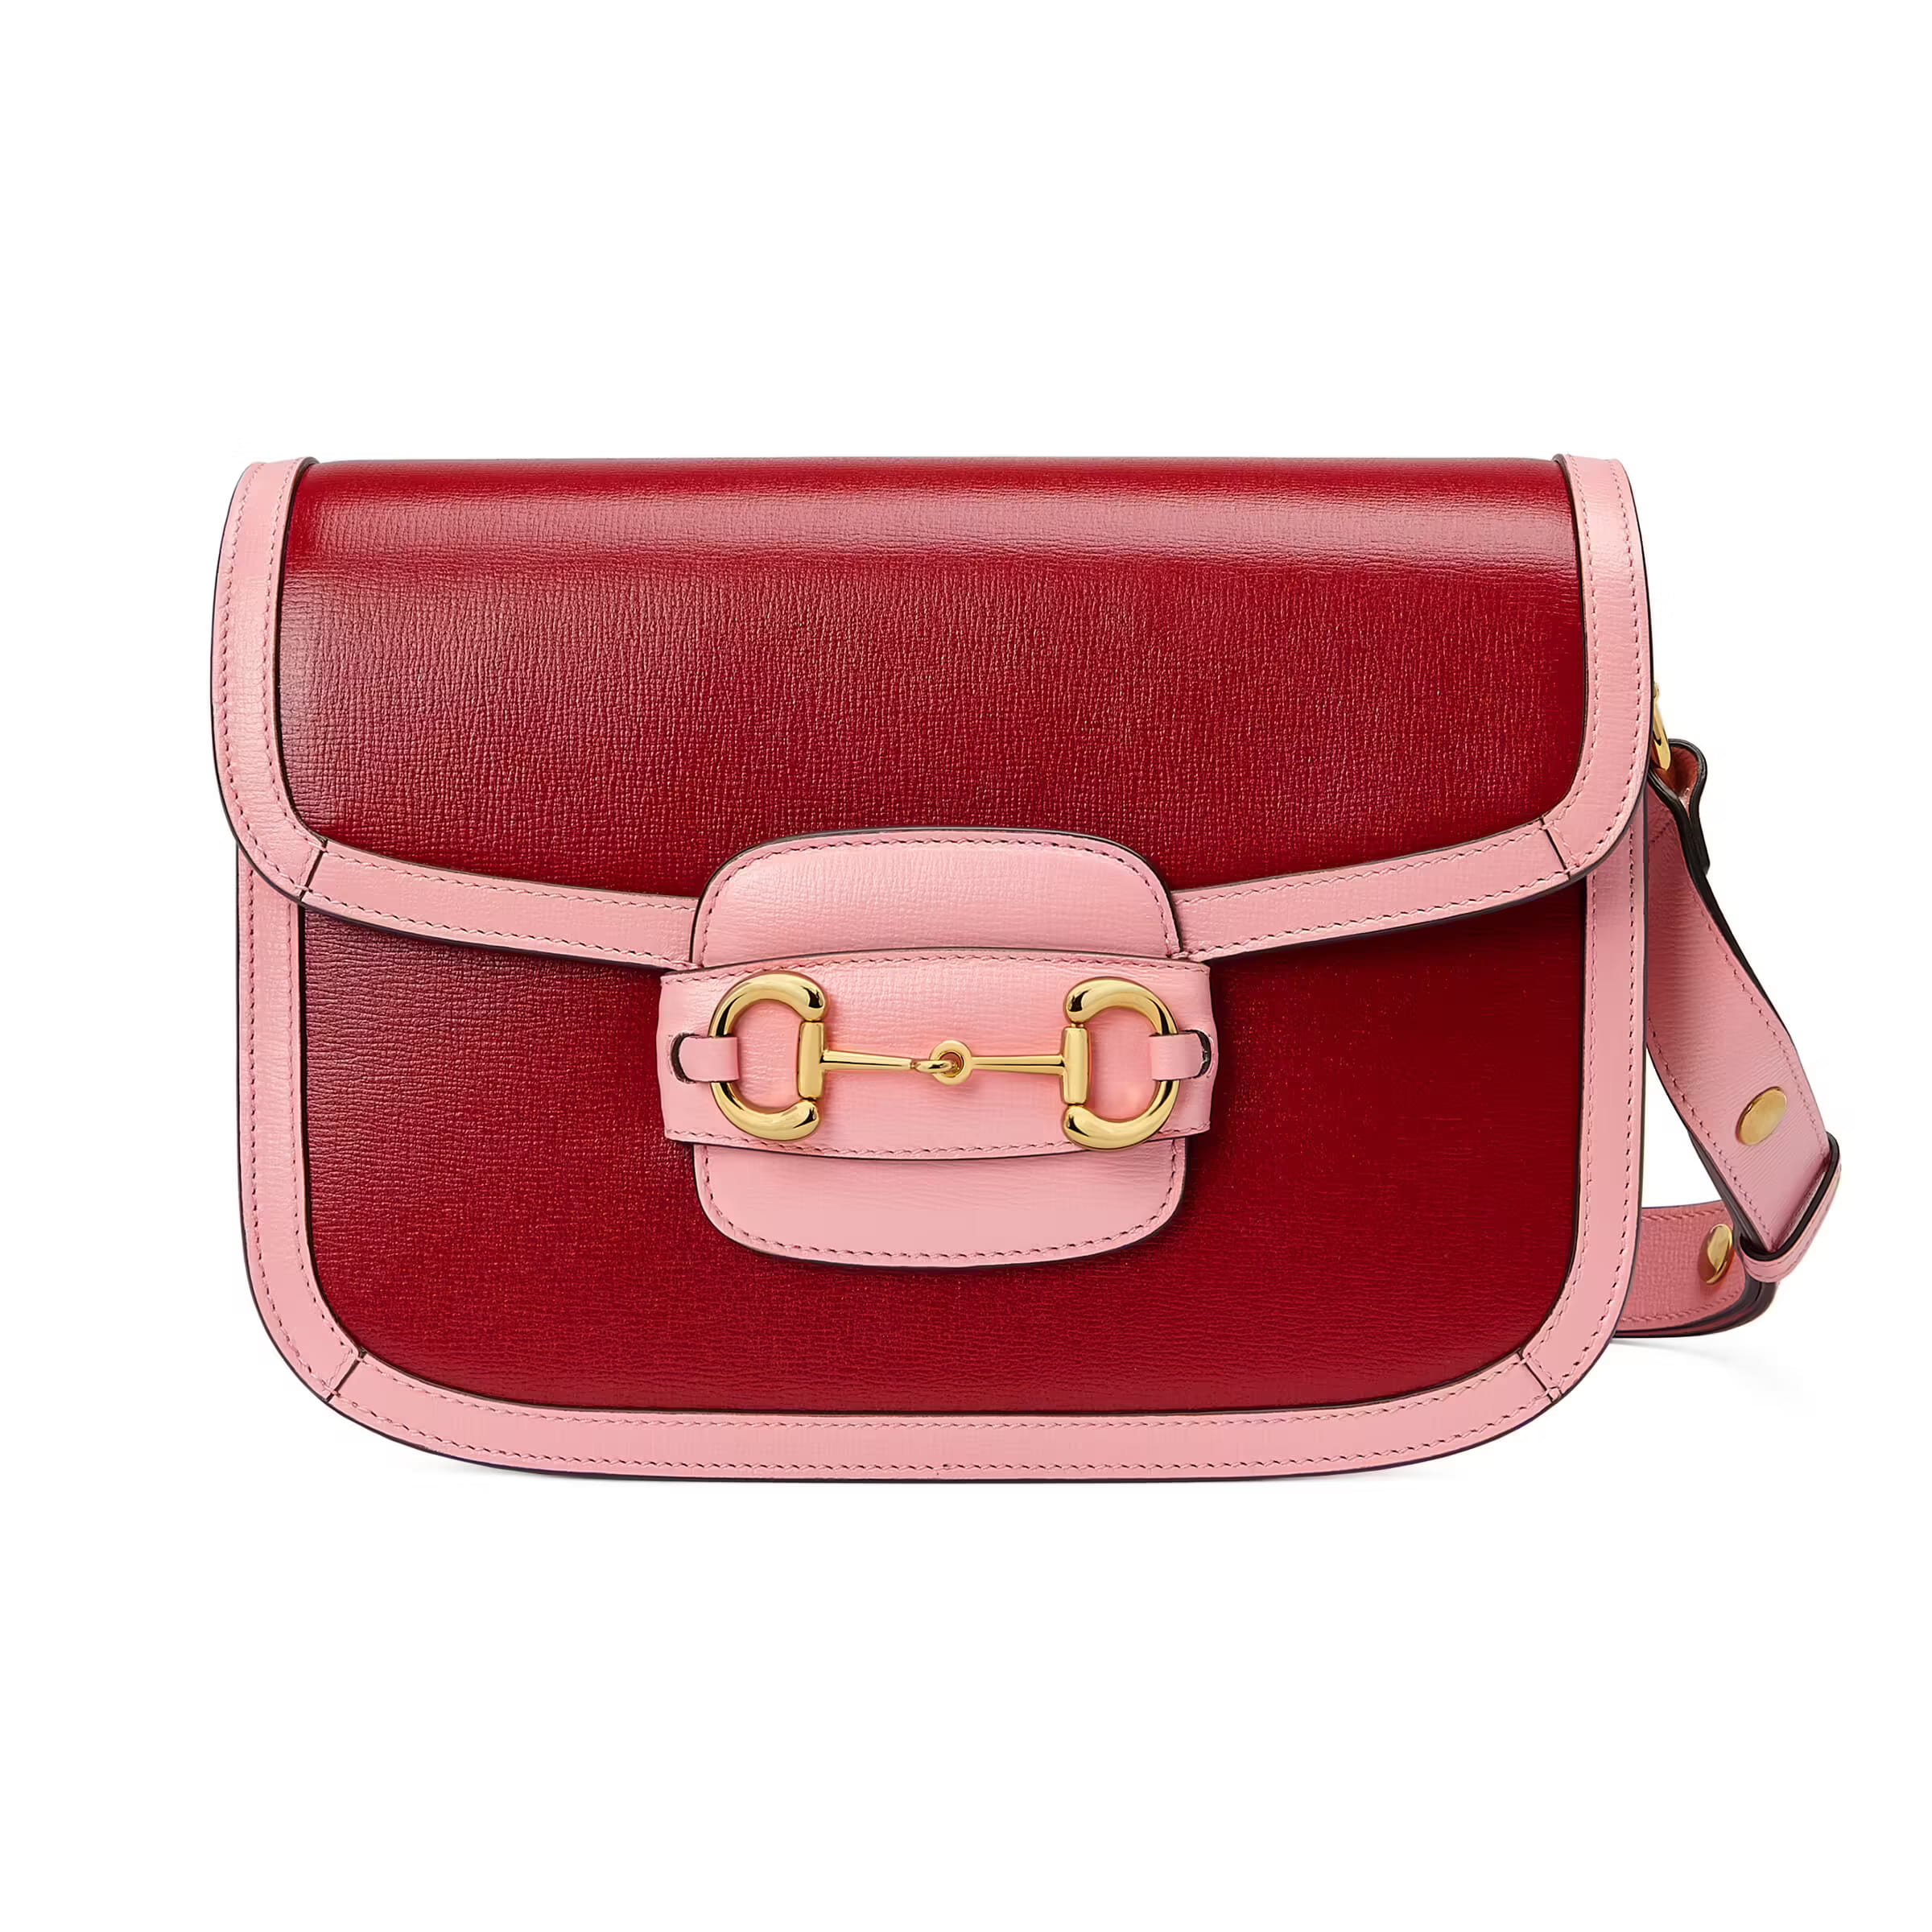 TÚI ĐEO CHÉO NỮ GUCCI 1955 HORSEBIT LEATHER SHOULDER BAG IN RED AND PINK 1